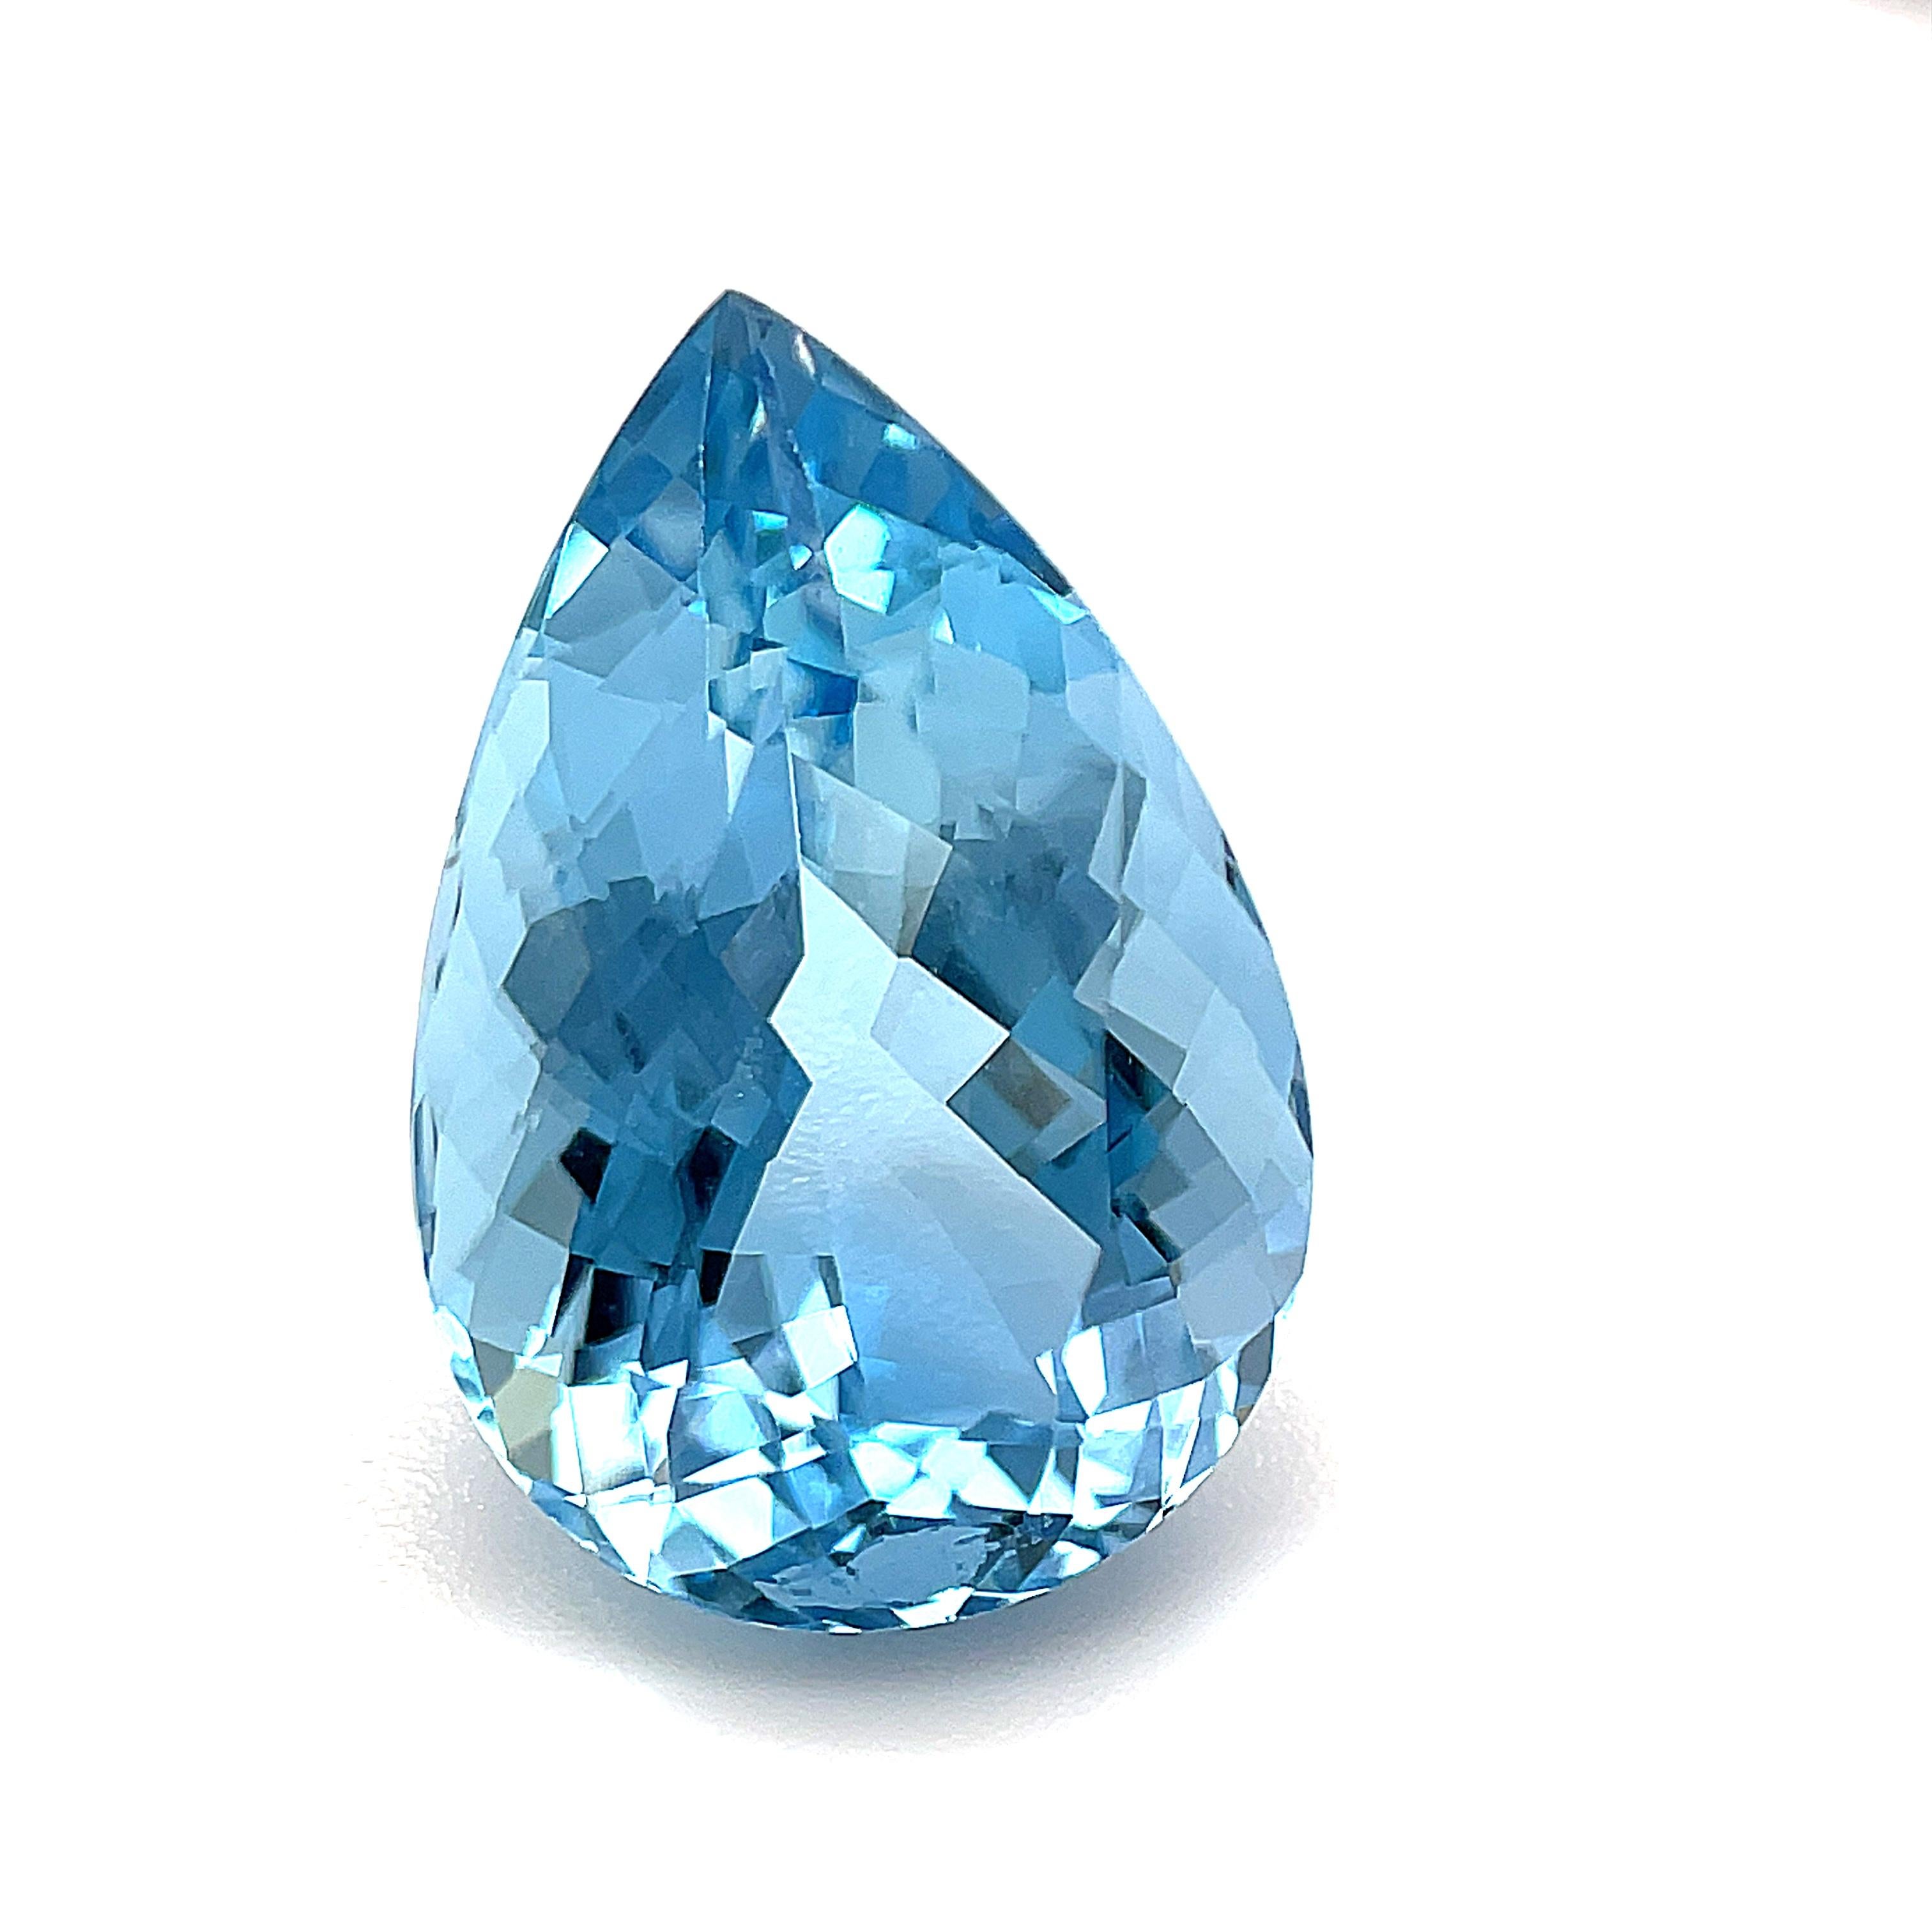 This sparkling pear-shaped aquamarine will make a gorgeous pendant or ring that will be perfect for your spring wardrobe, or anytime of year! One of the most popular and well-known gemstones, this aquamarine is particularly special with bright,